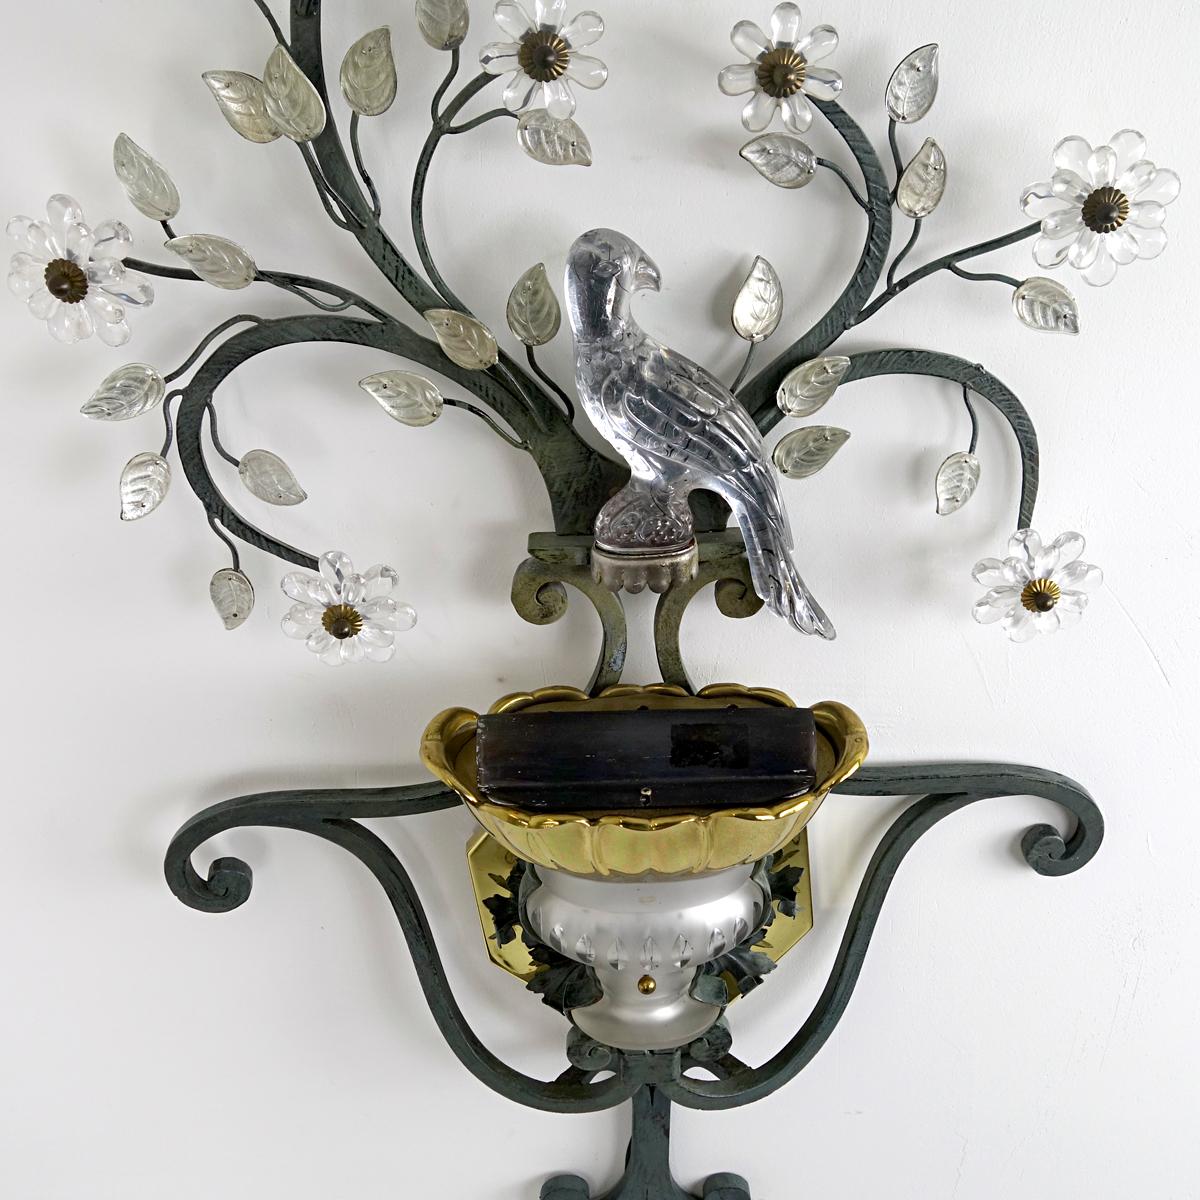 Art Deco Large Italian Sconce with Crystal Bird, Flowers and Leaves by Banci Firenze